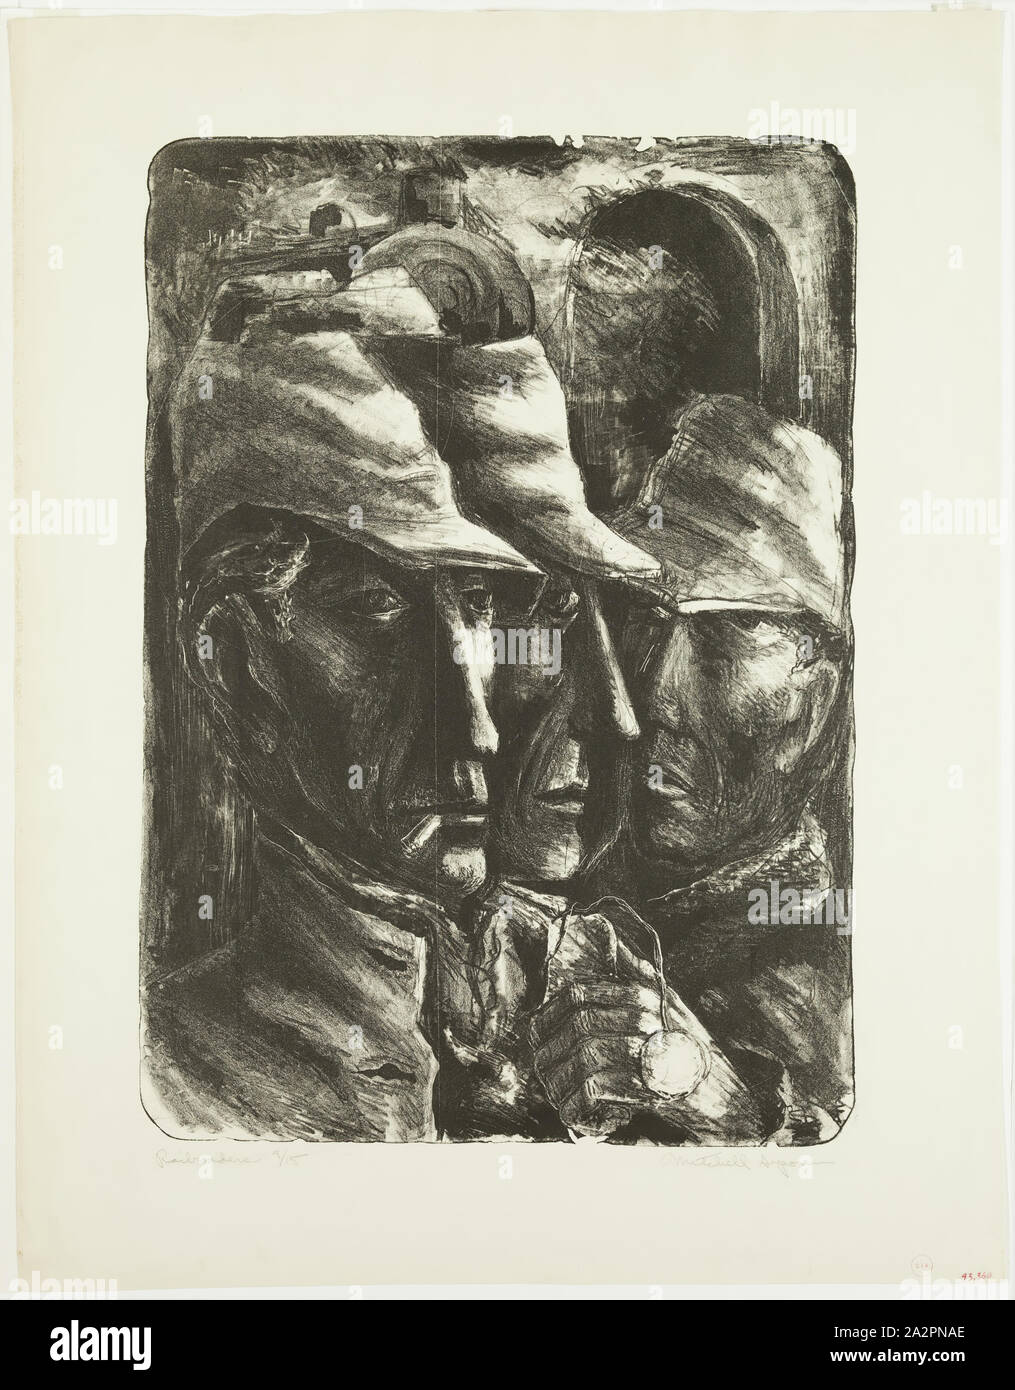 Mitchell Siporin, American, 1910-1976, Railroaders, ca. between 1935 and 1942, lithograph printed in black ink on wove paper, Image: 21 7/8 × 15 1/2 inches (55.6 × 39.4 cm Stock Photo